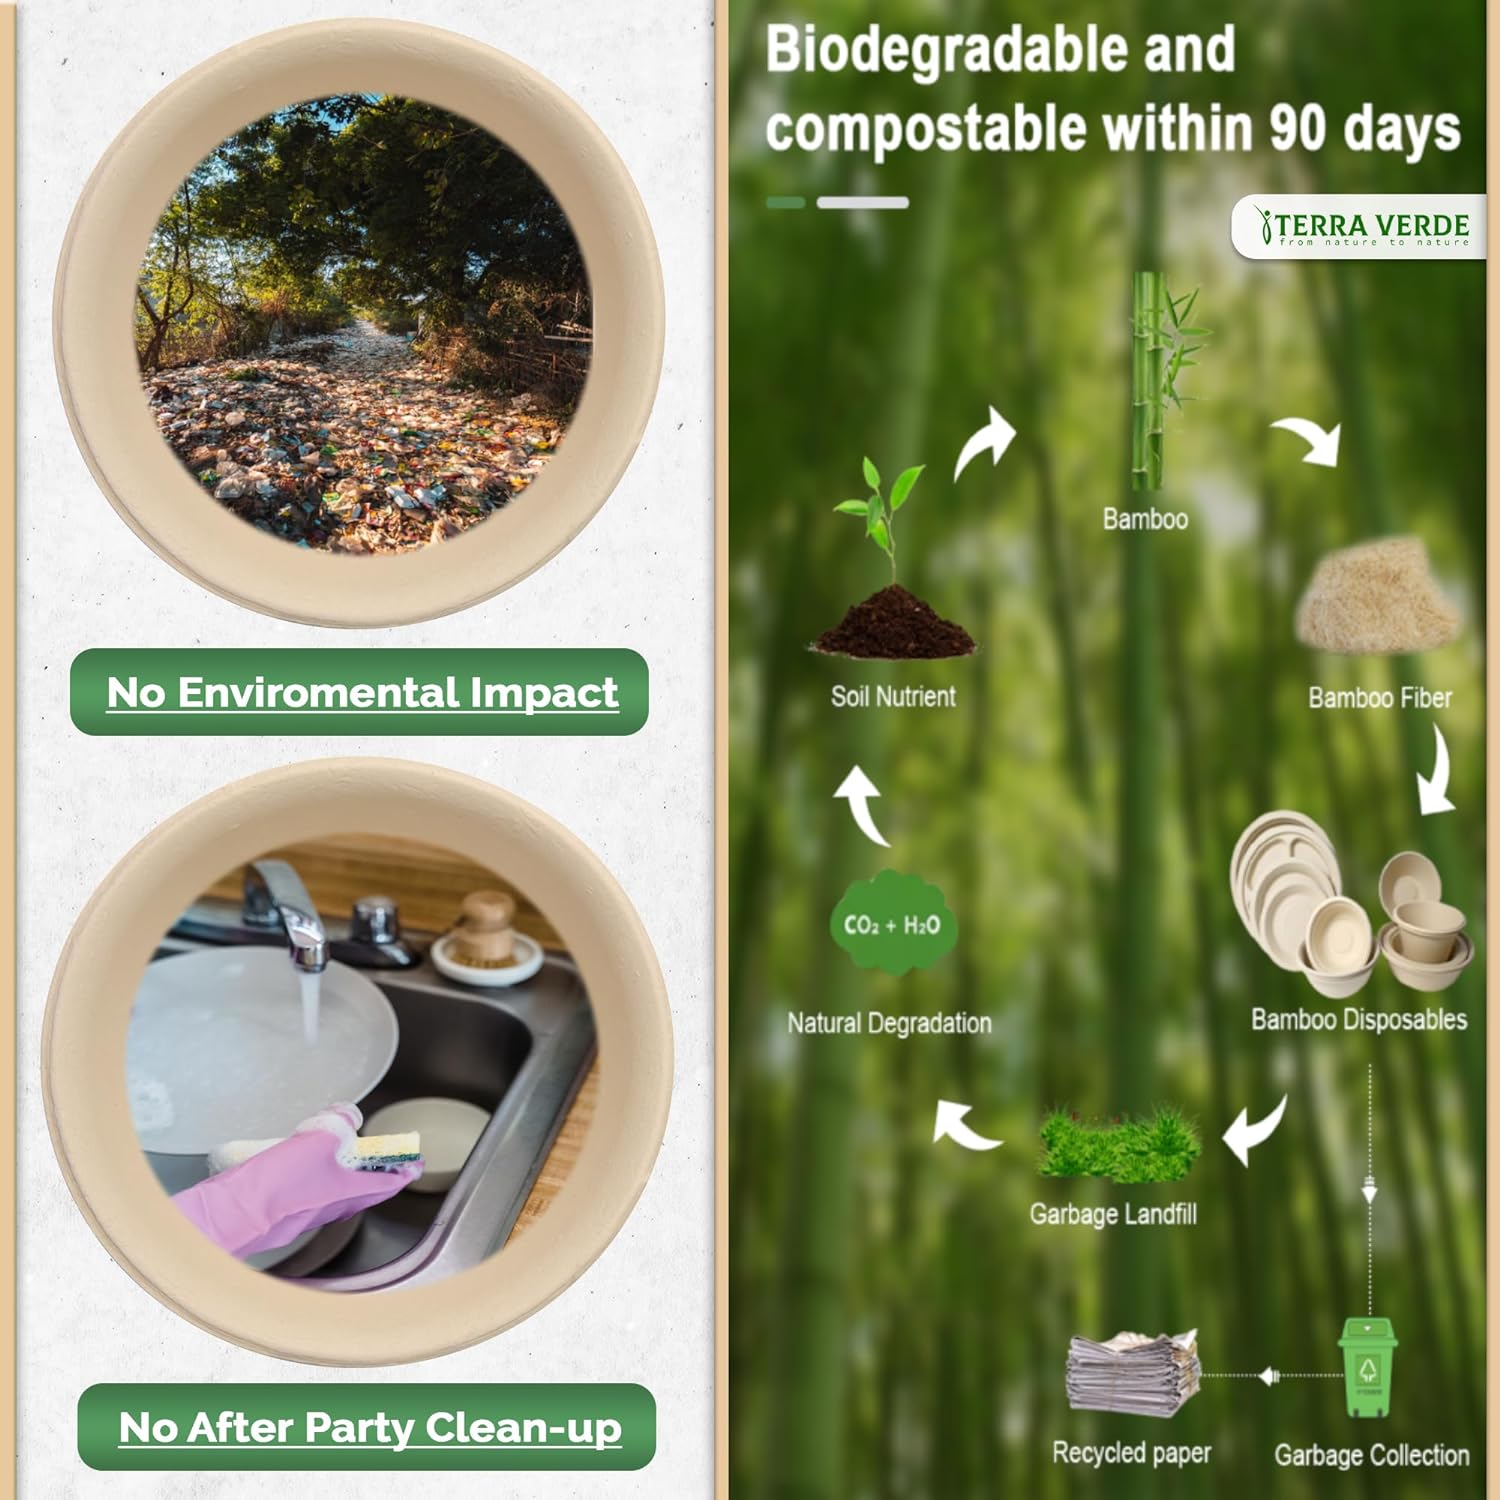 biodegradable and compostable plate in 90 days